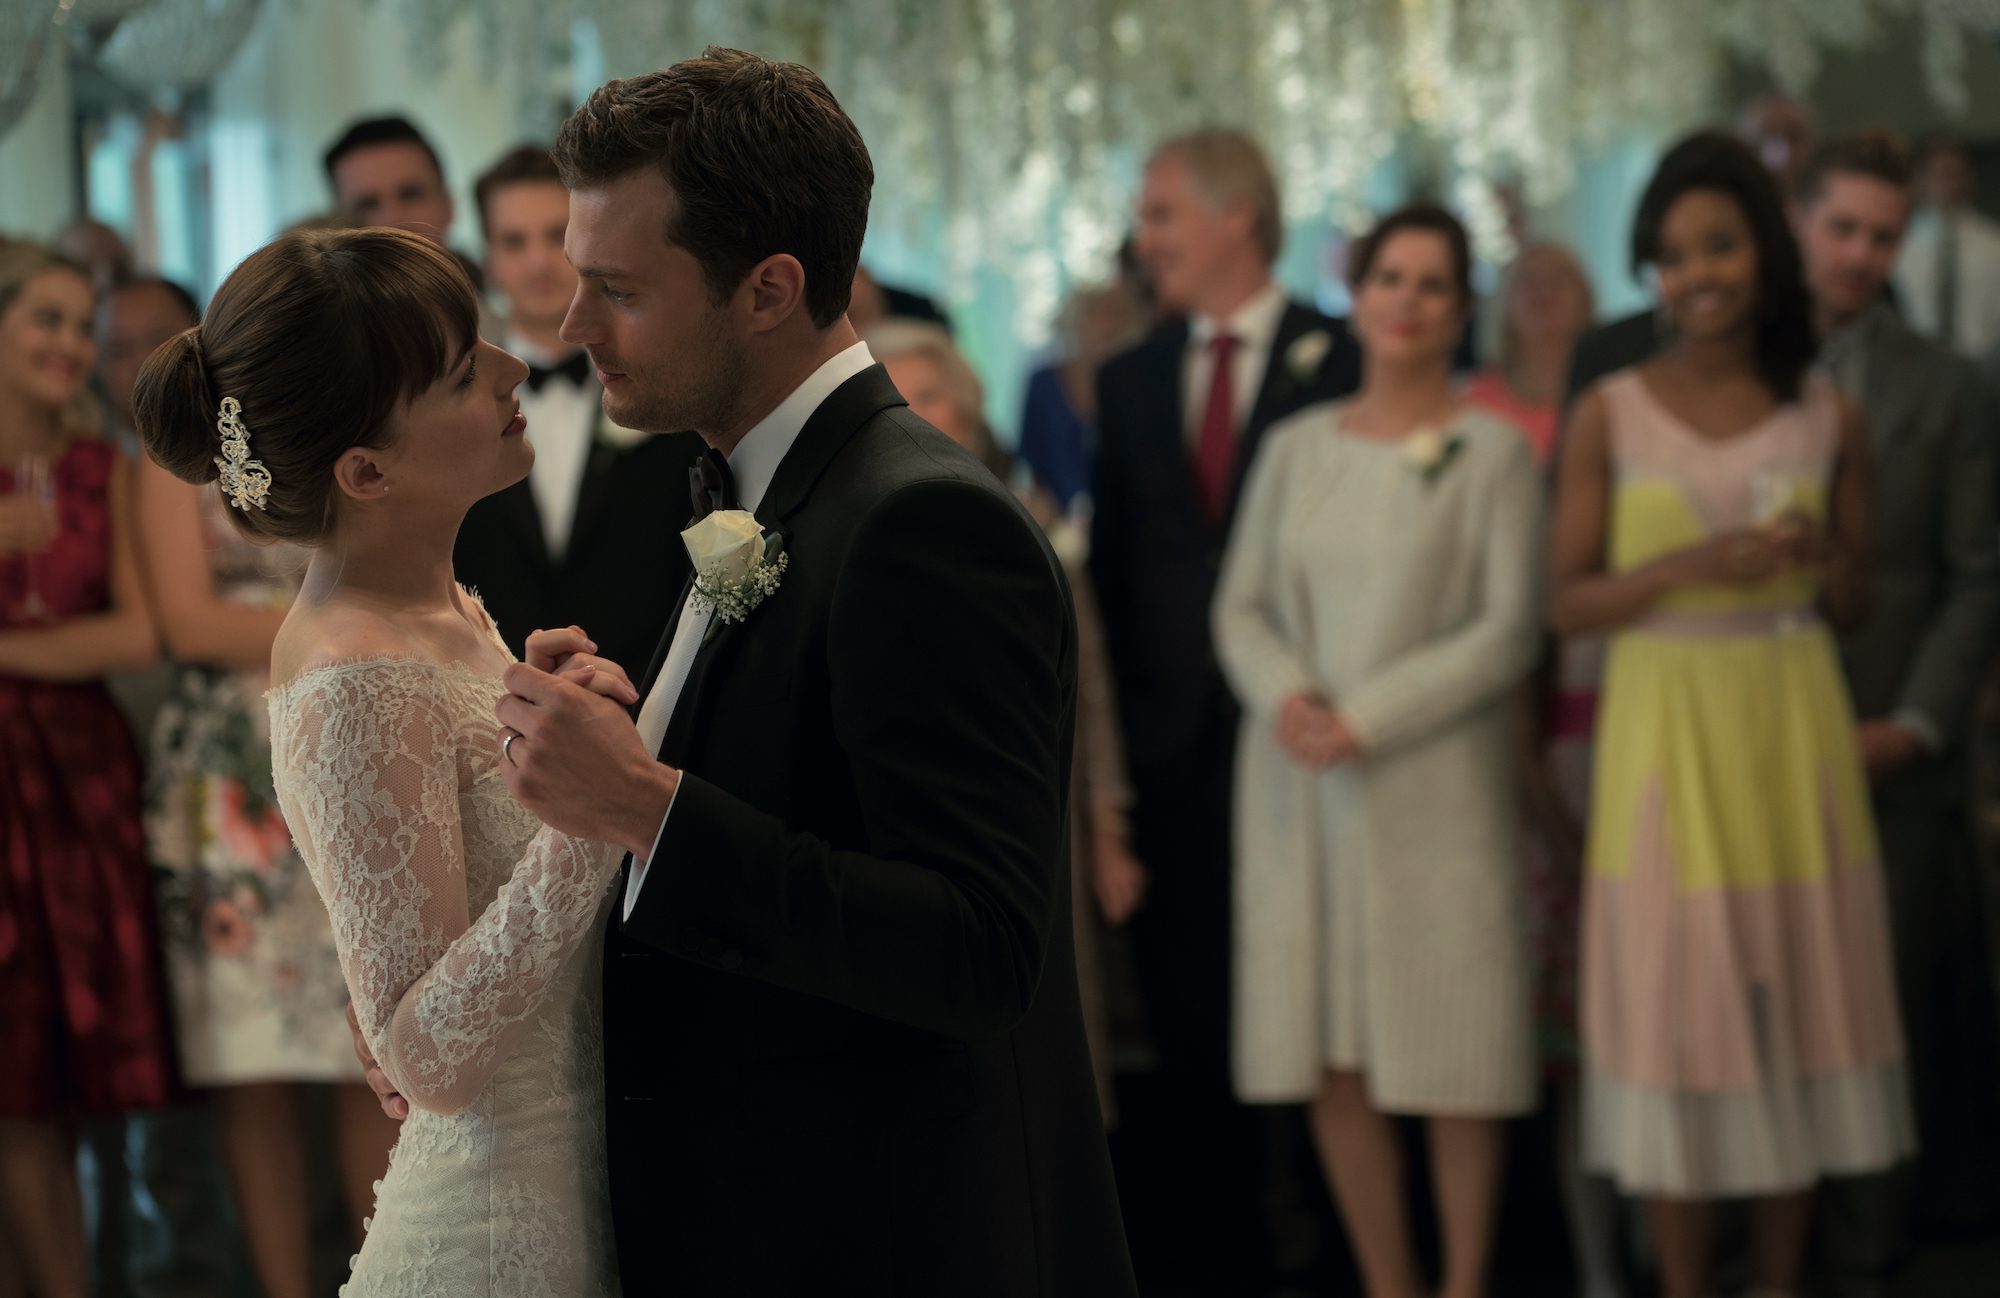 full movie of fifty shades freed